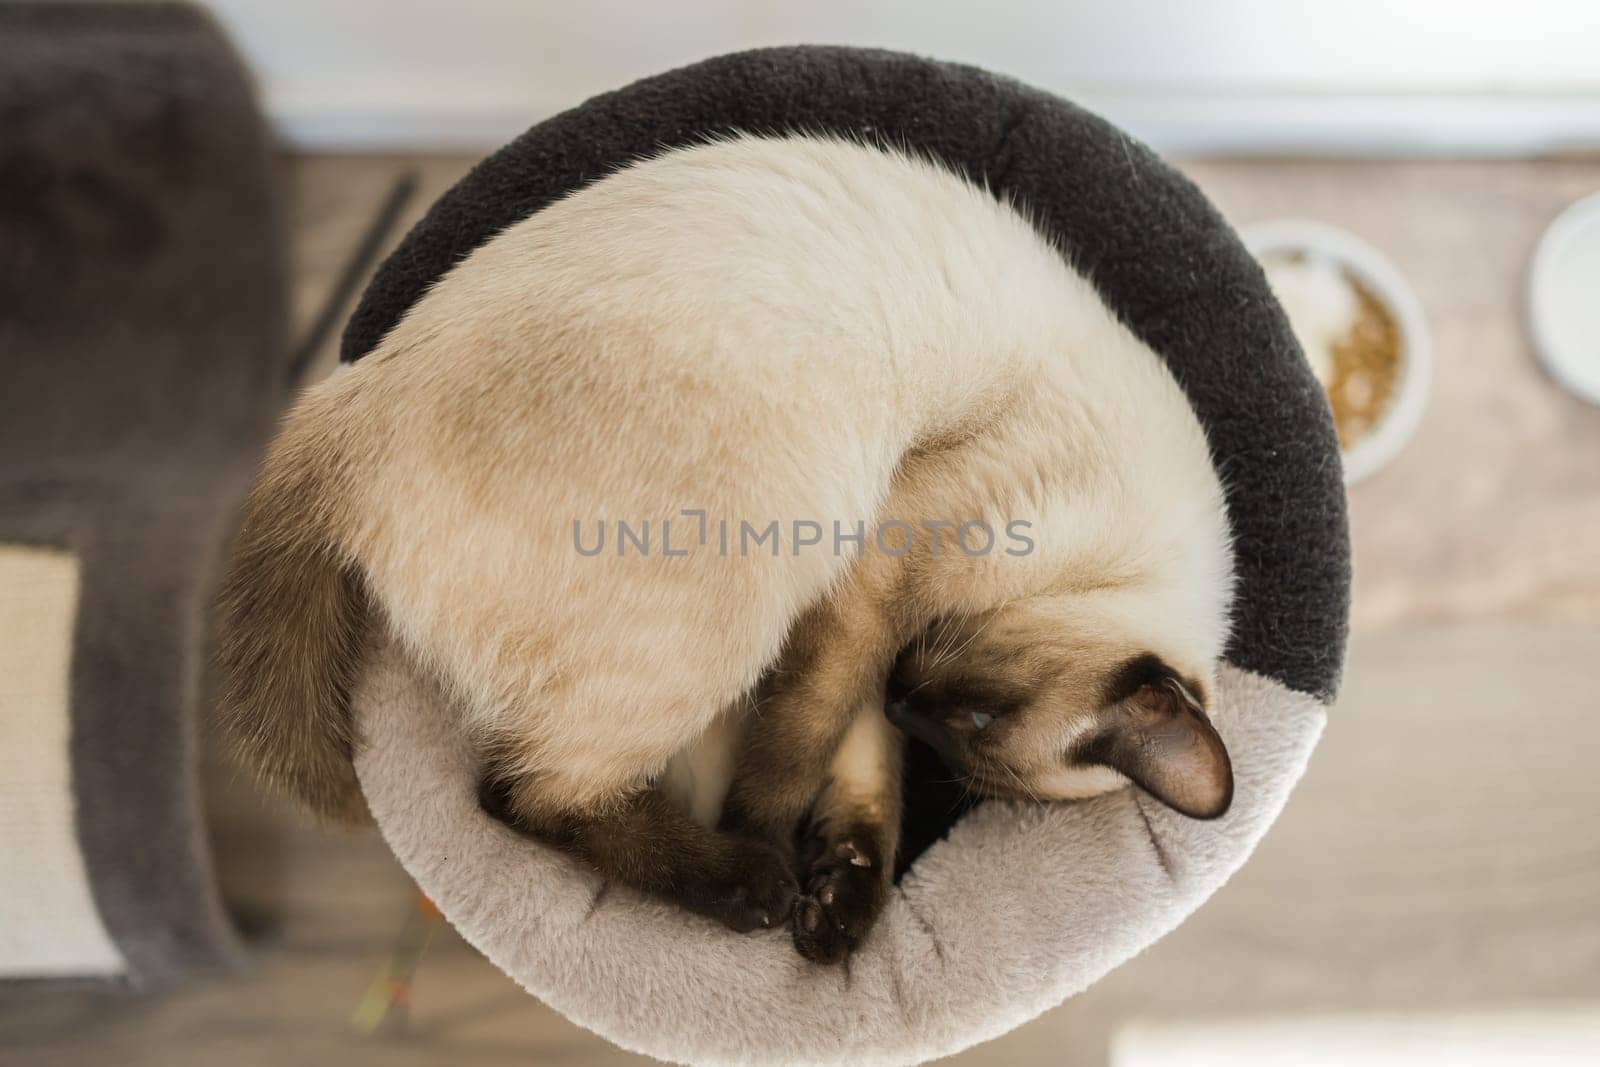 Small siamese cat sleeping on her cat's bed with soft cozy environment top view copy space. Pet concept by Satura86